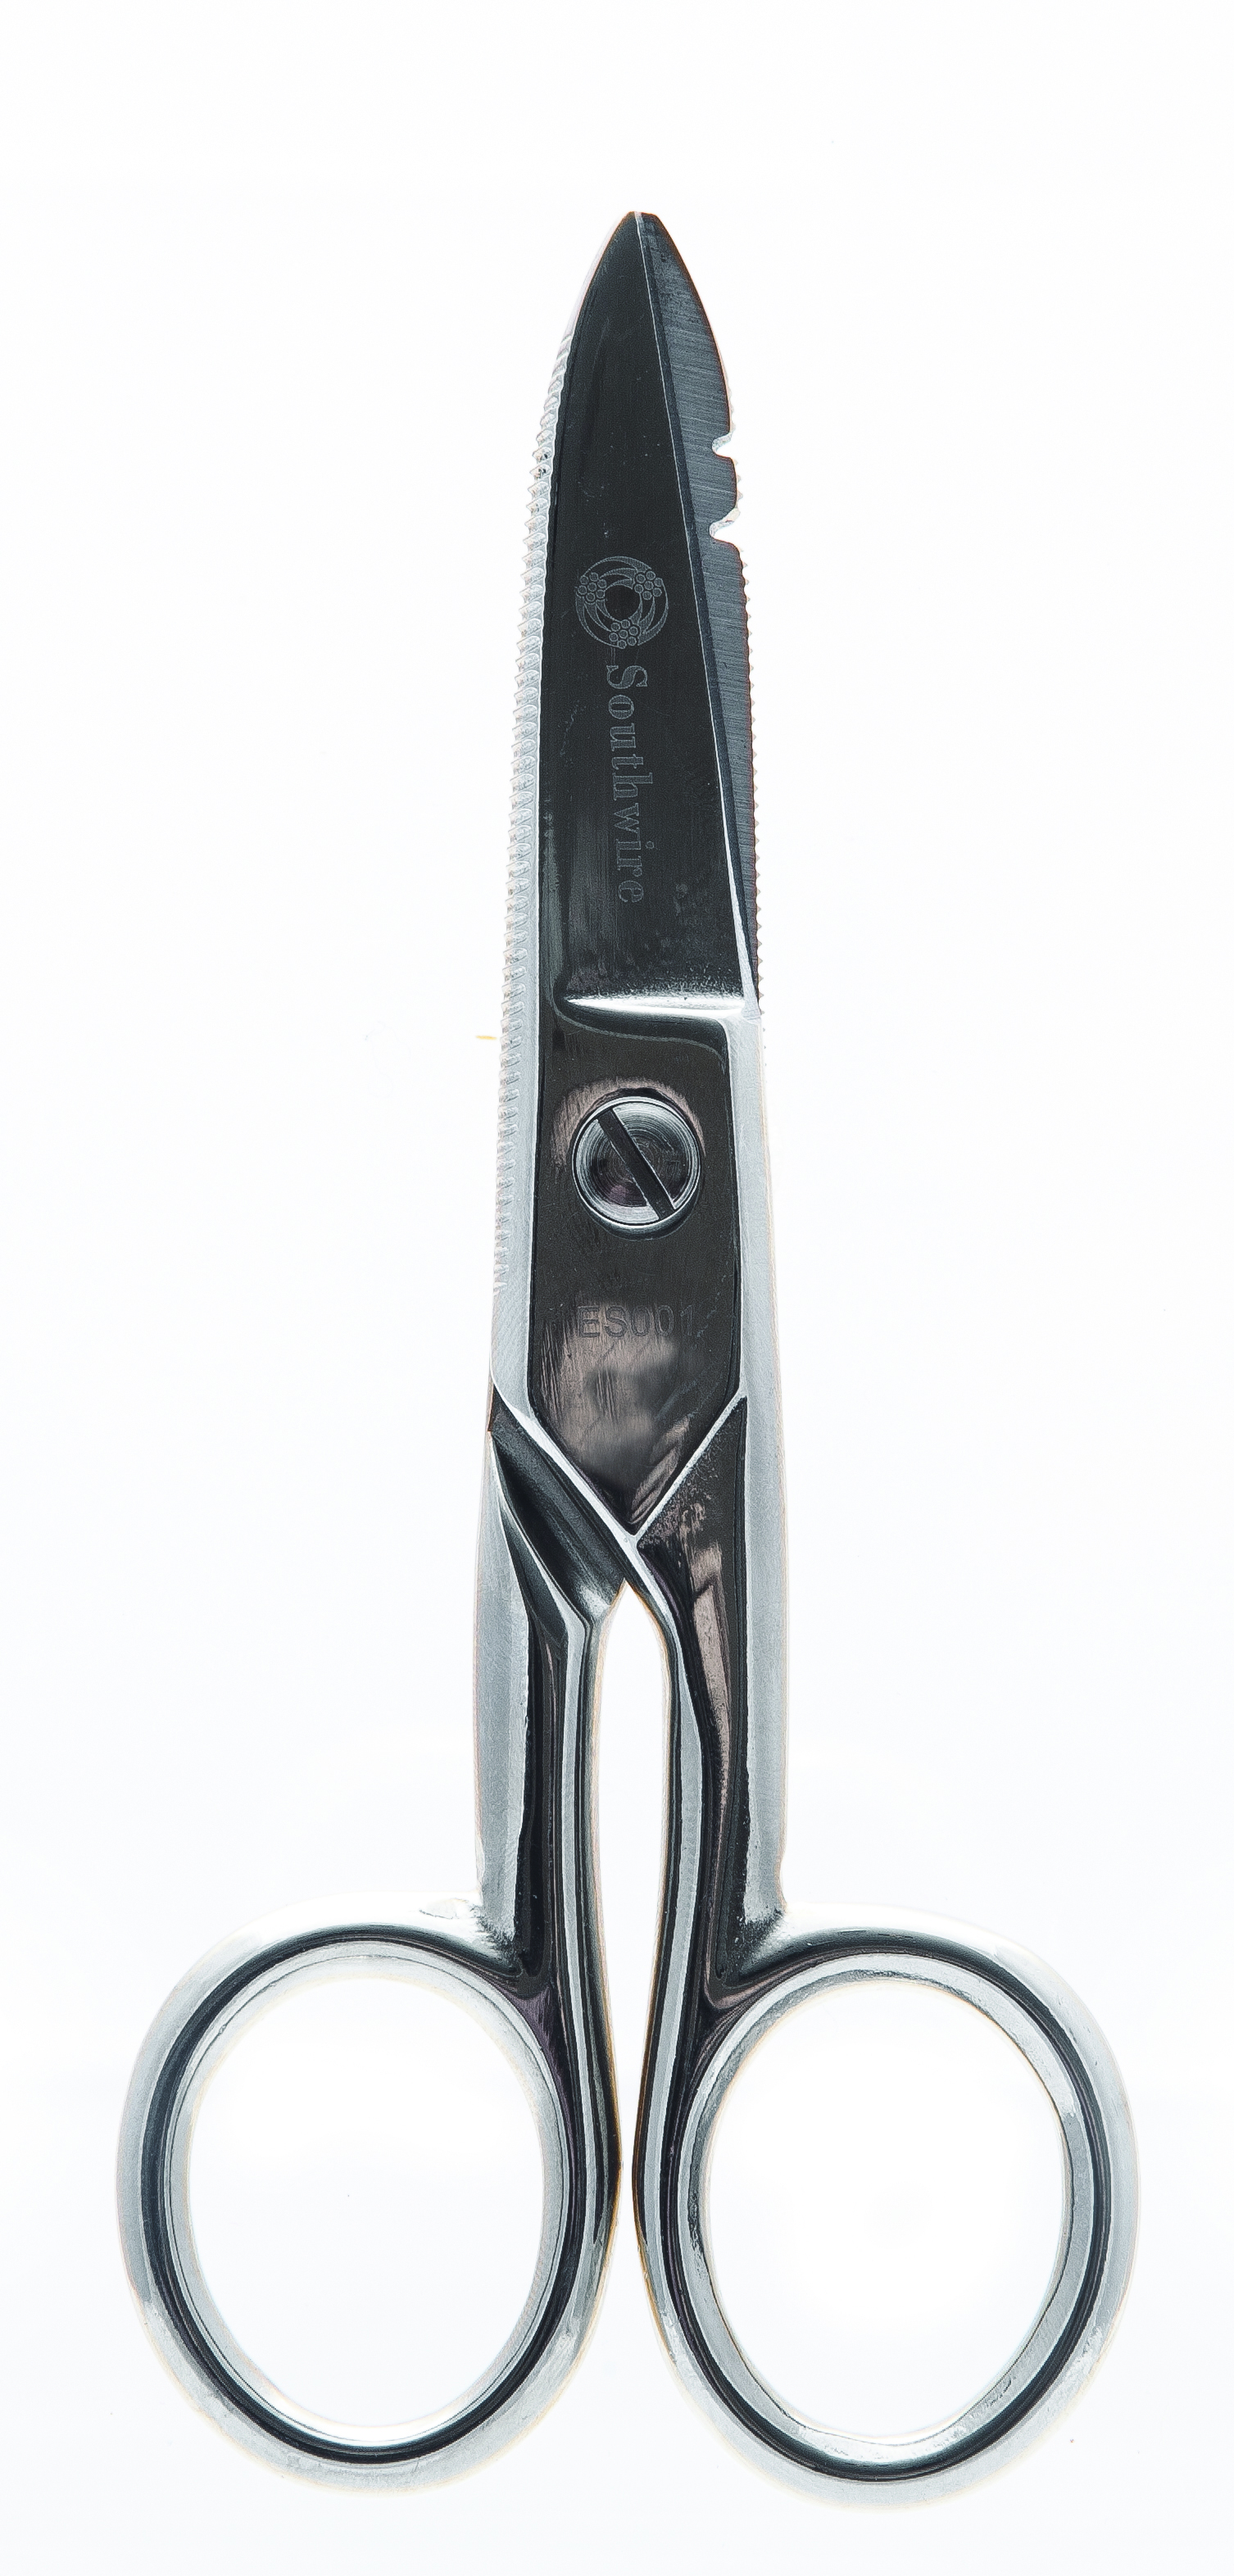 Unlike regular scissors or shears, the serrated blades of this powerful scissor keeps wire from slipping out of the jaws, making cutting through hardware cloth, cable, wire netting, and other difficult-to-cut materials becomes an easy task.